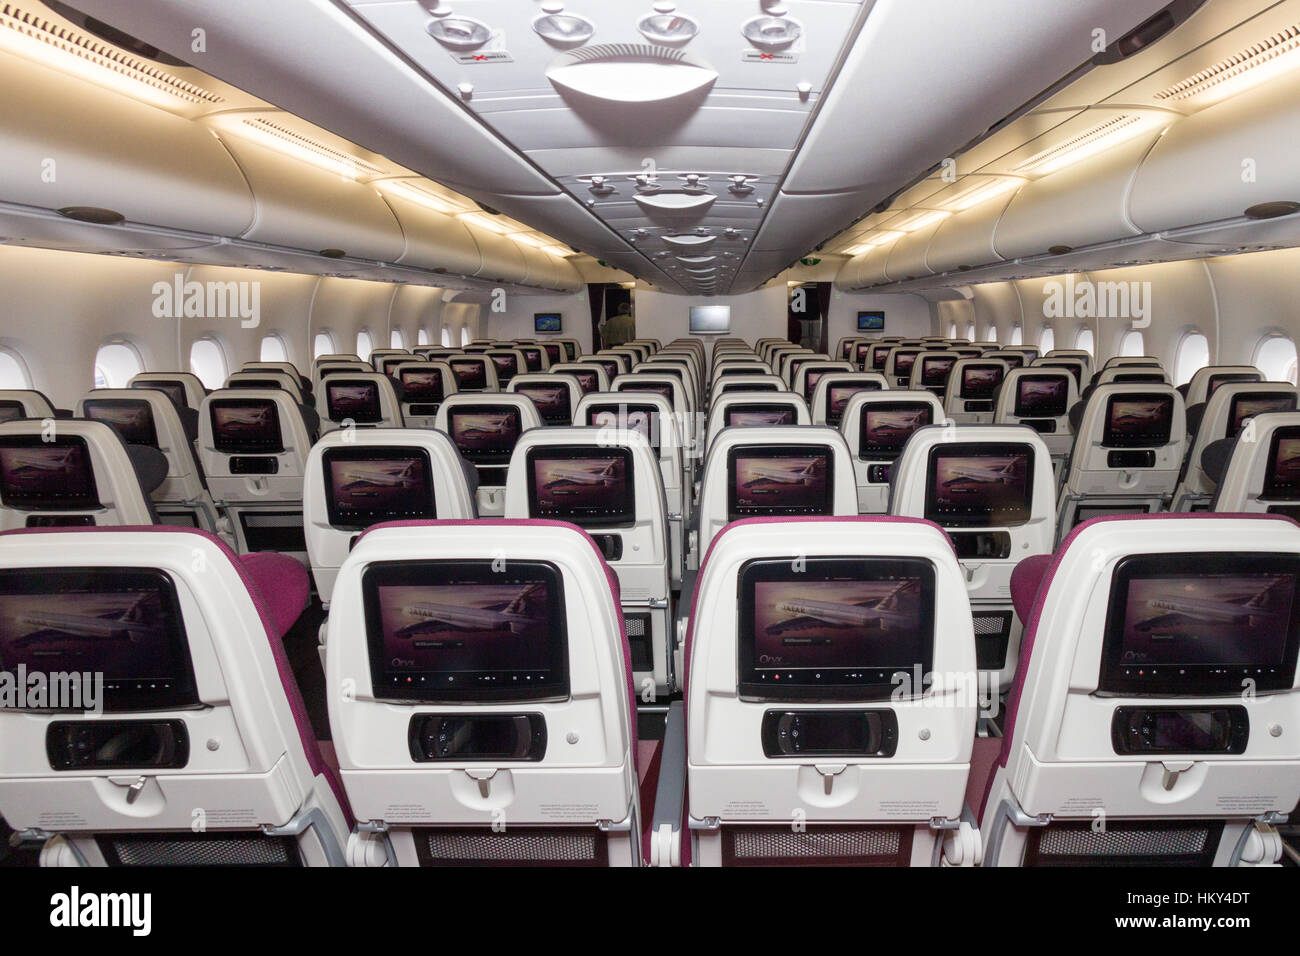 PARIS - JUN 18, 2015: Cabin view of a Qatar Airways Airbus A380. The A380 is the largest passenger airliner in the world. Stock Photo